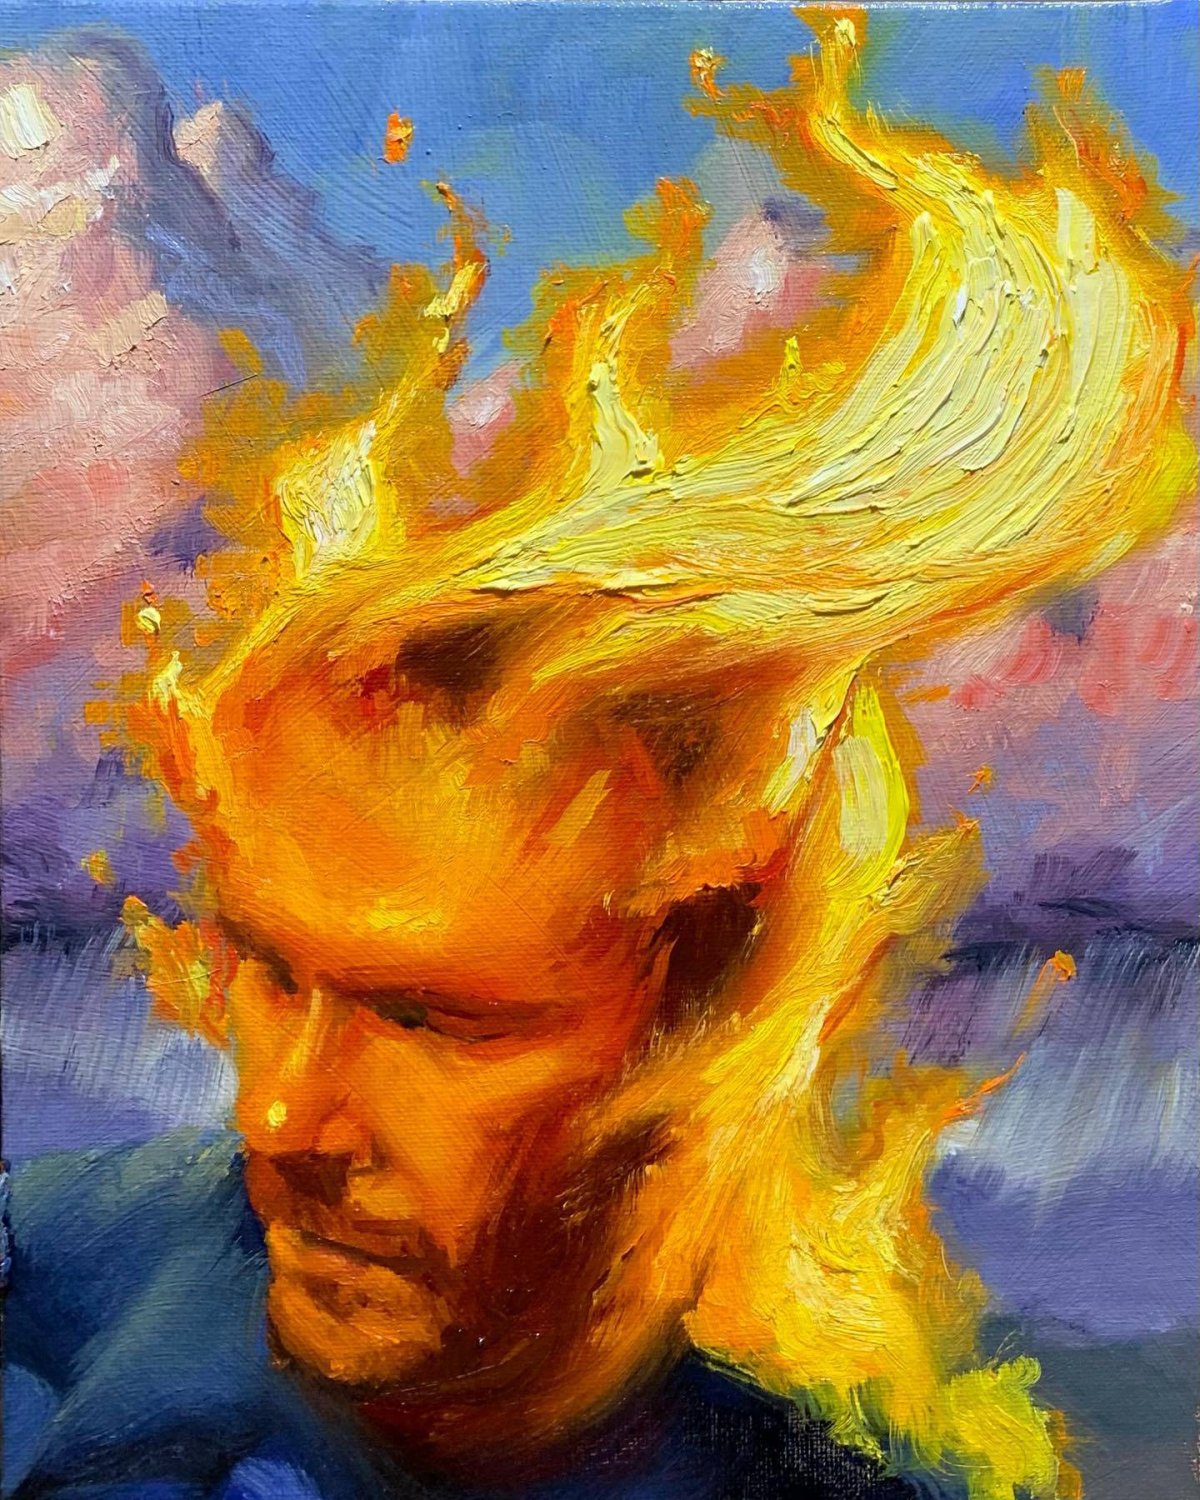 Minds On Fire Reflective Paintings By Rodney Thompson 2